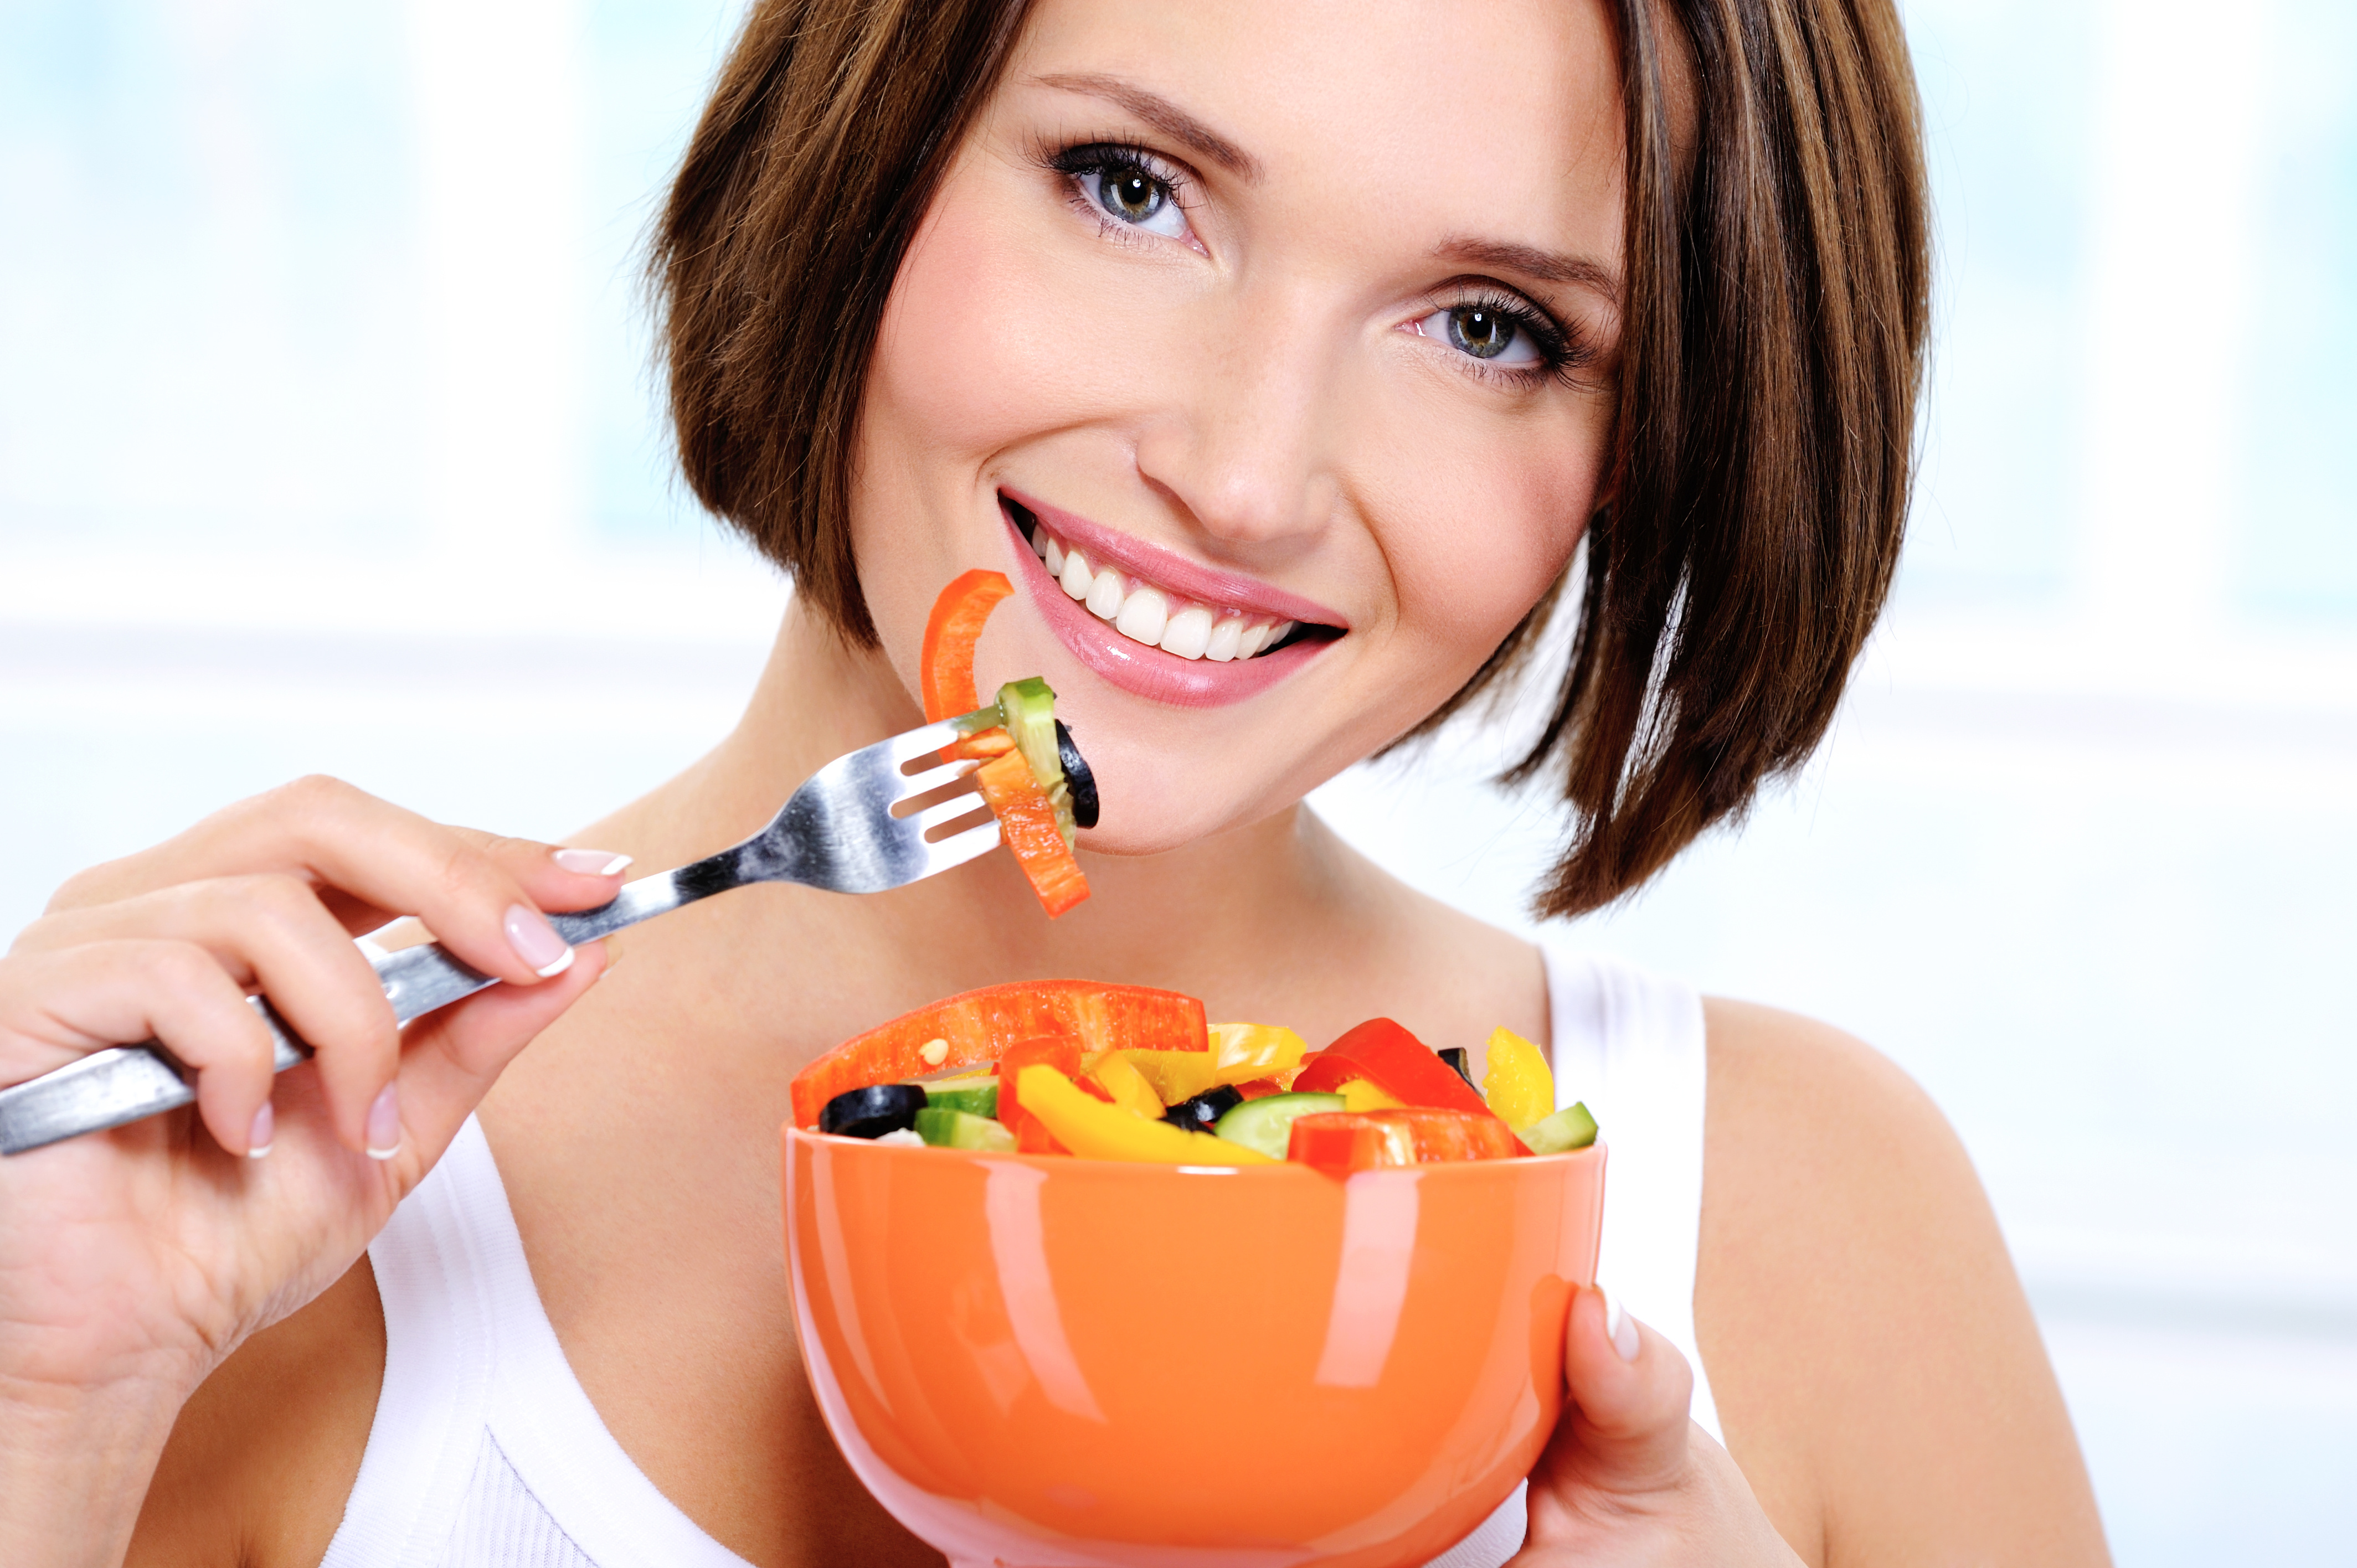 woman with a plate of vegetable salad in hands